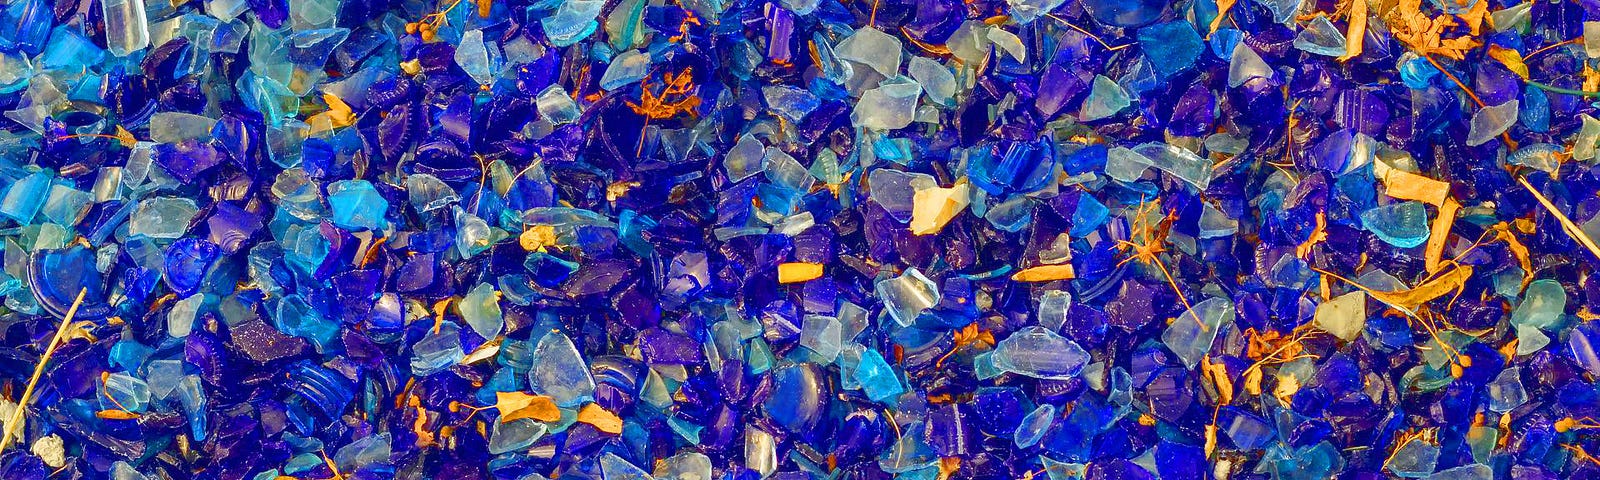 Picture of bright blue and white glass shards.